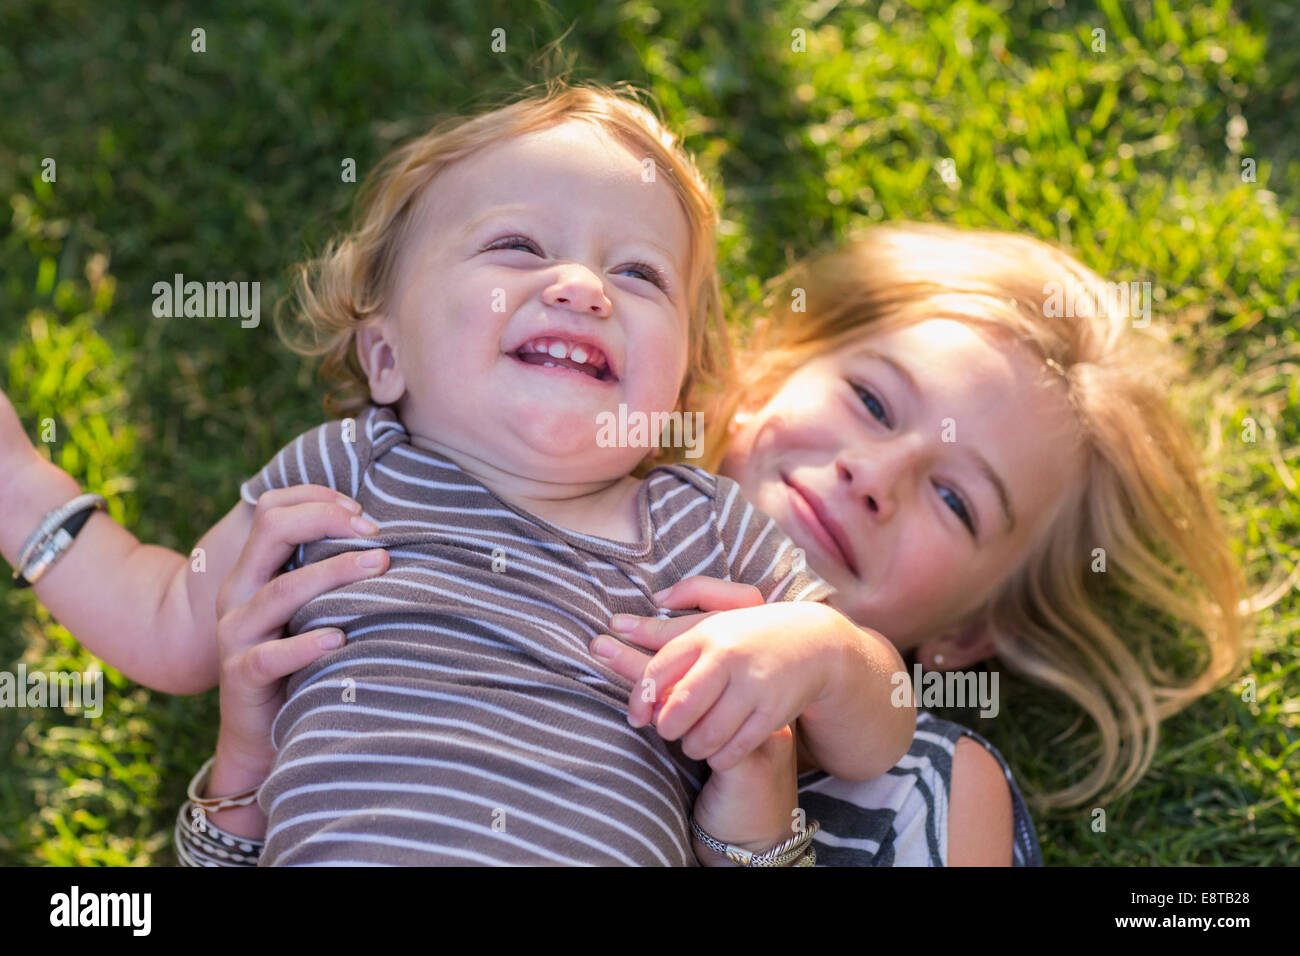 Caucasian sister holding baby brother in grass Banque D'Images